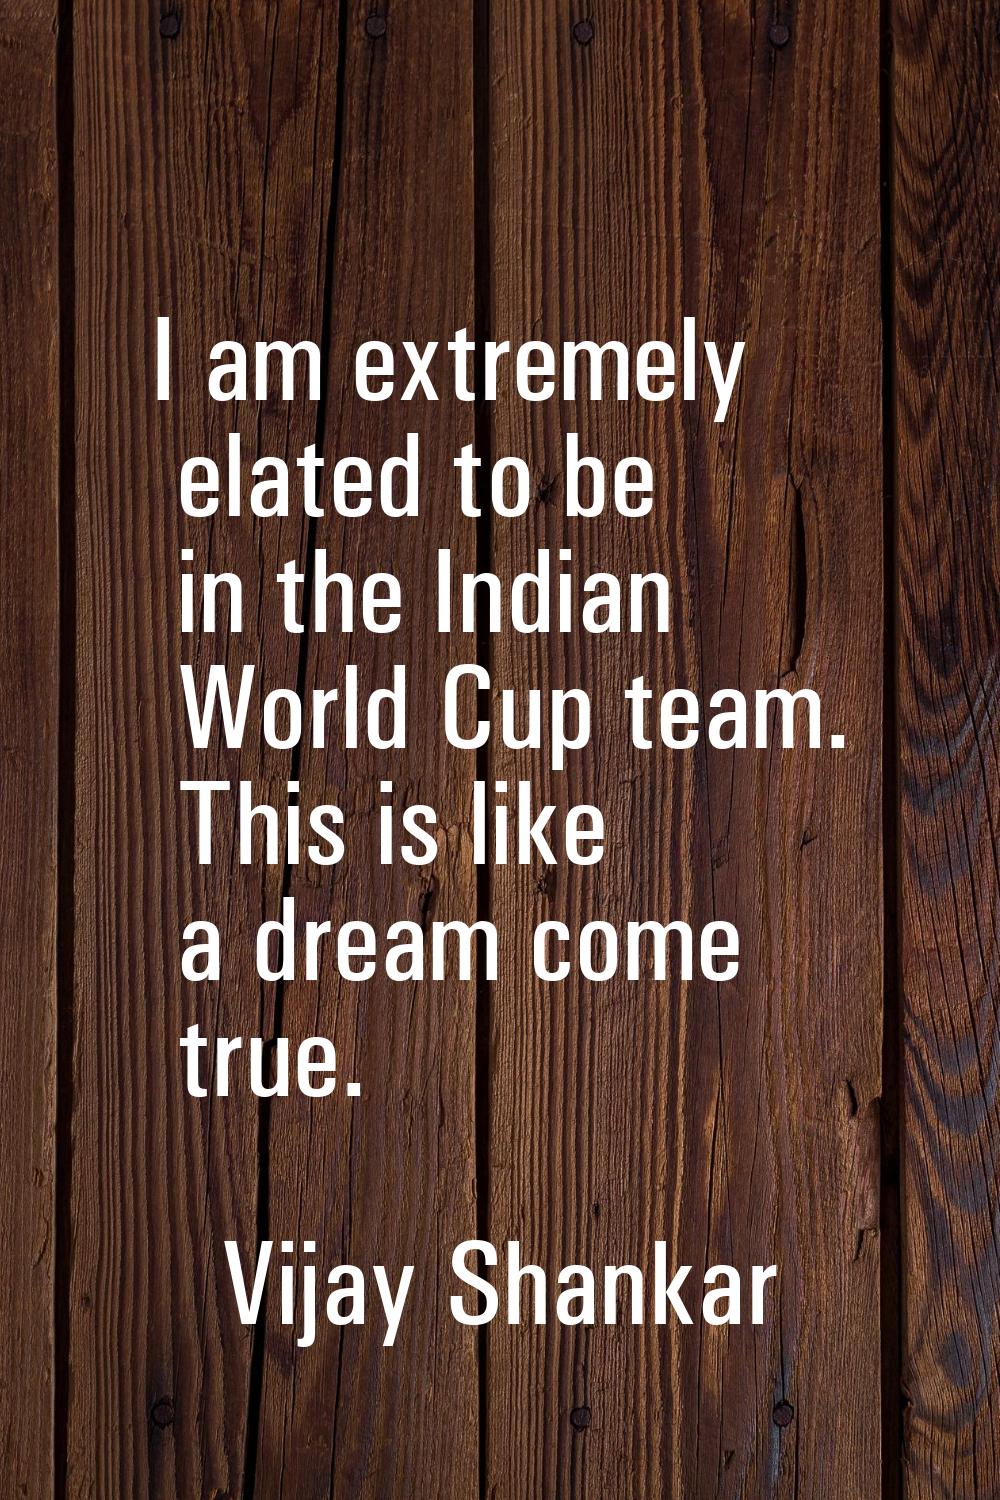 I am extremely elated to be in the Indian World Cup team. This is like a dream come true.